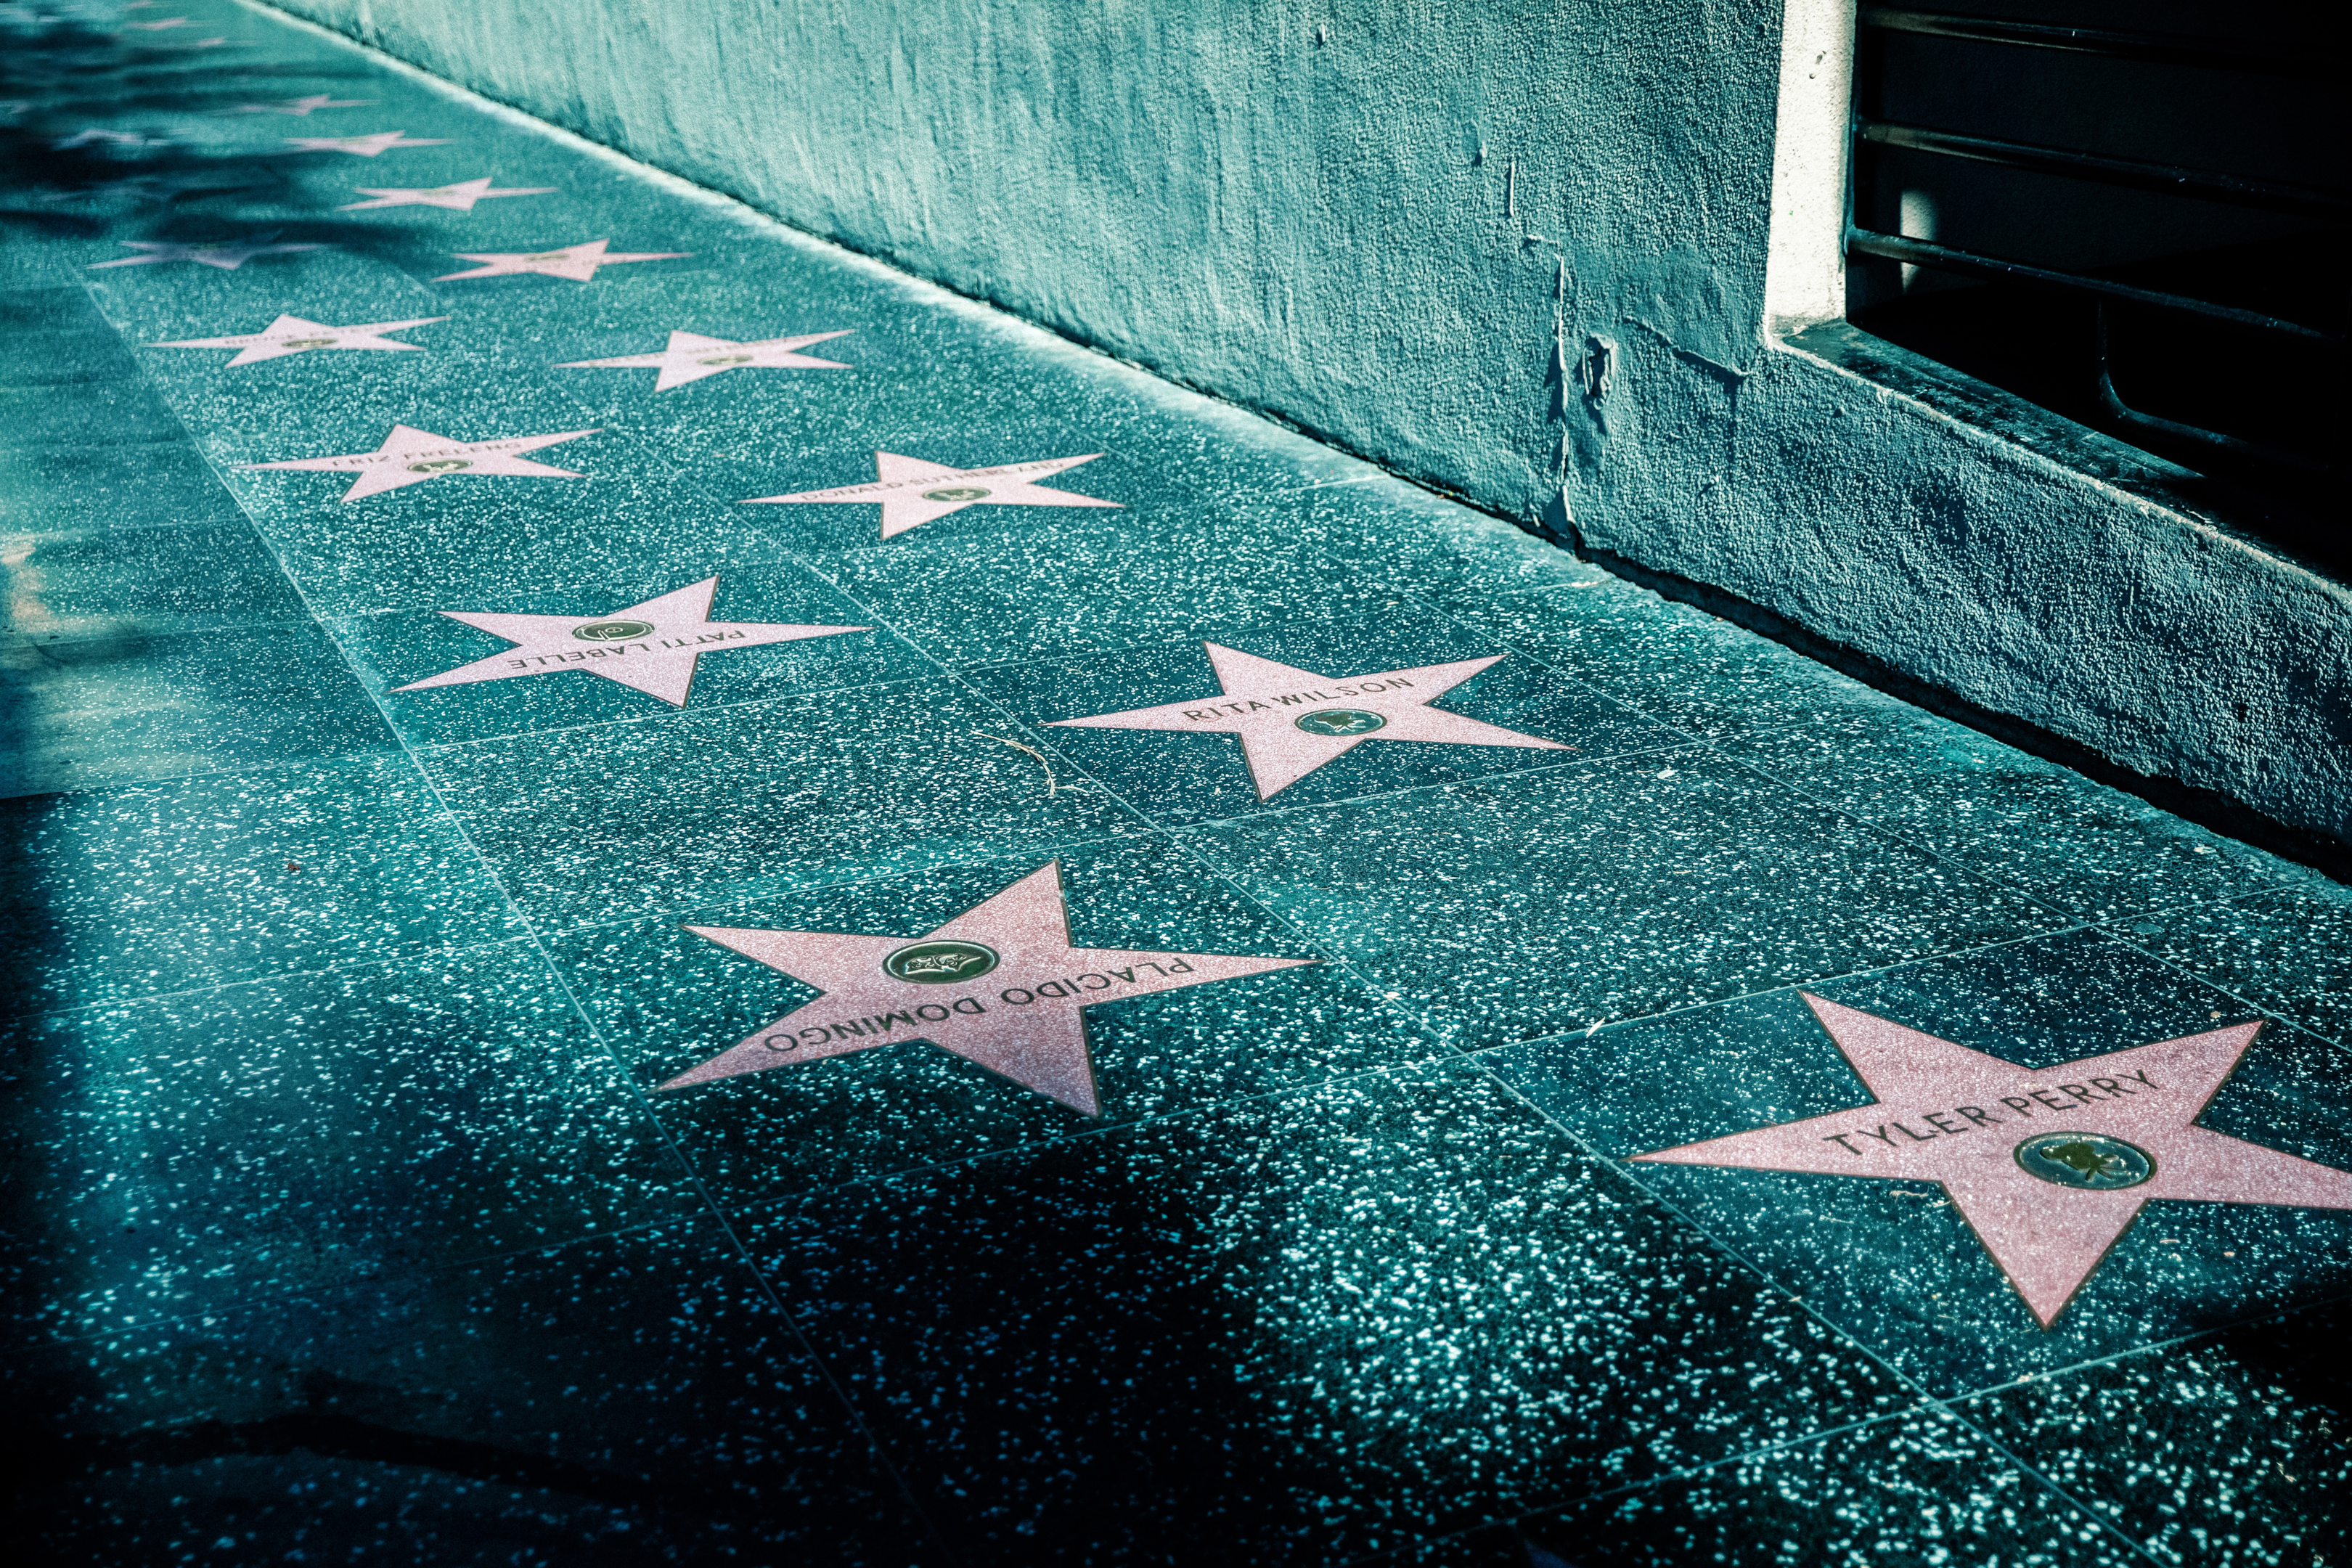 Hollywood Walk of Fame stars in Los Angeles. Photo by Ekaterina